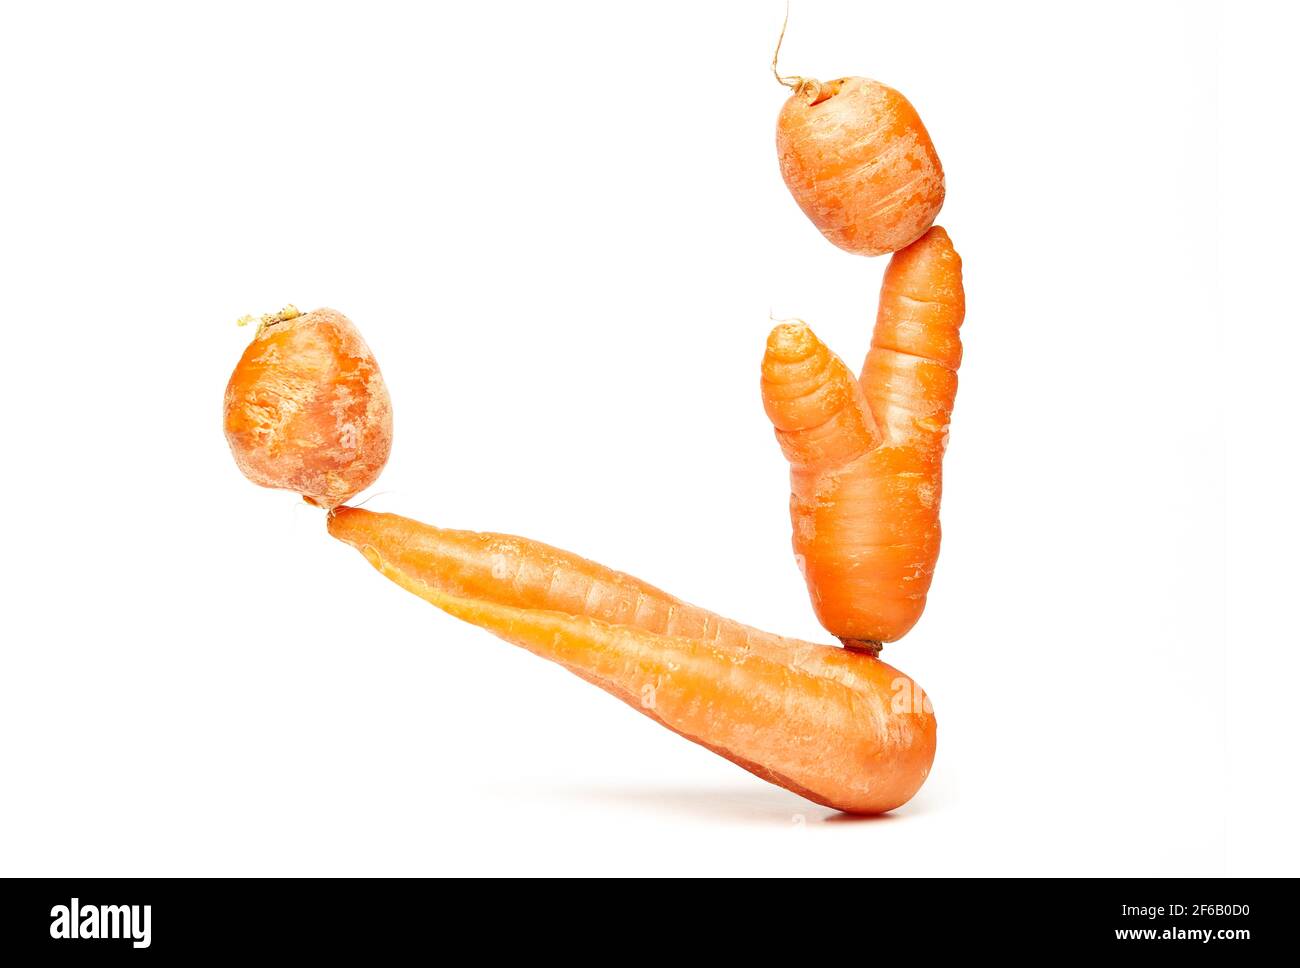 Fresh natural ugly raw carrots isolated on white background. Balancing carrots, healthy nutrition concept Stock Photo